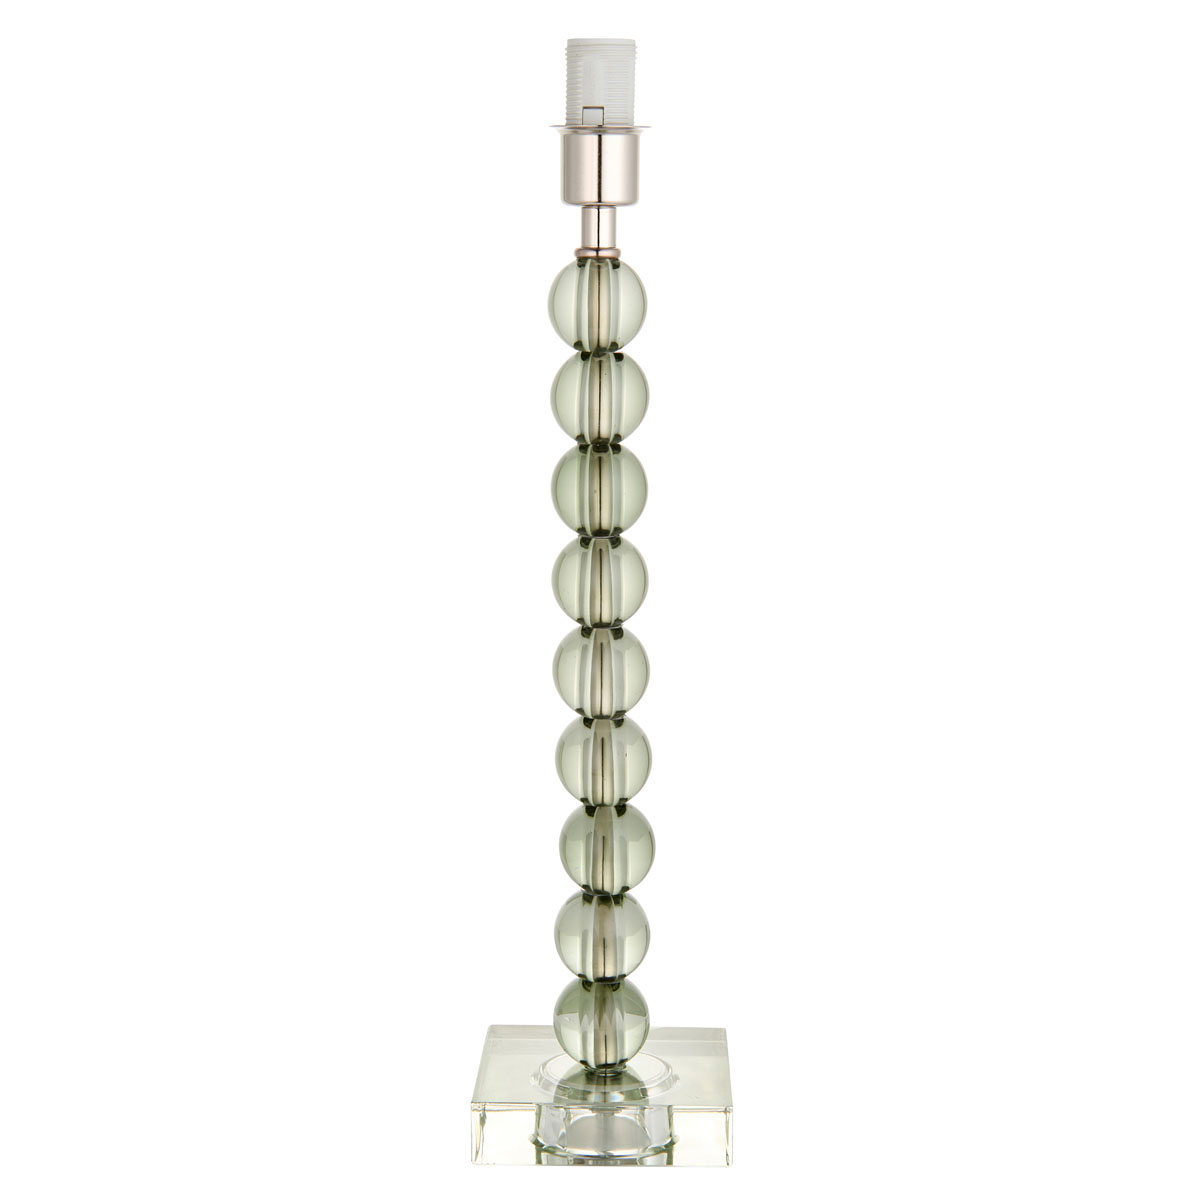 Adelie 1 Table Lamp Green / Grey Tinted